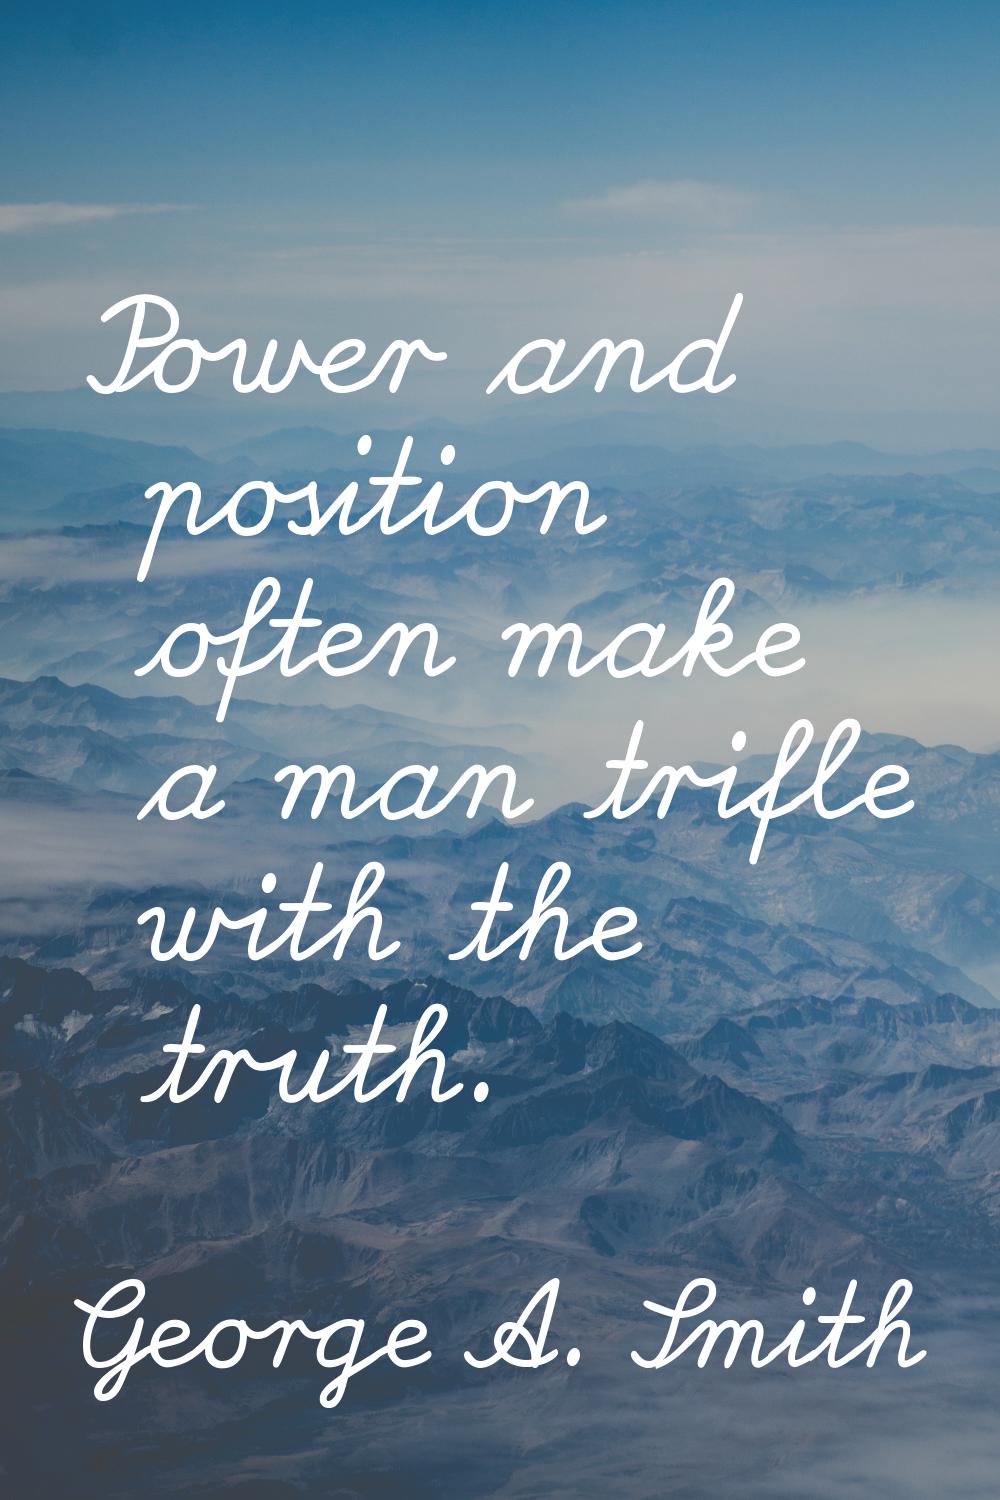 Power and position often make a man trifle with the truth.